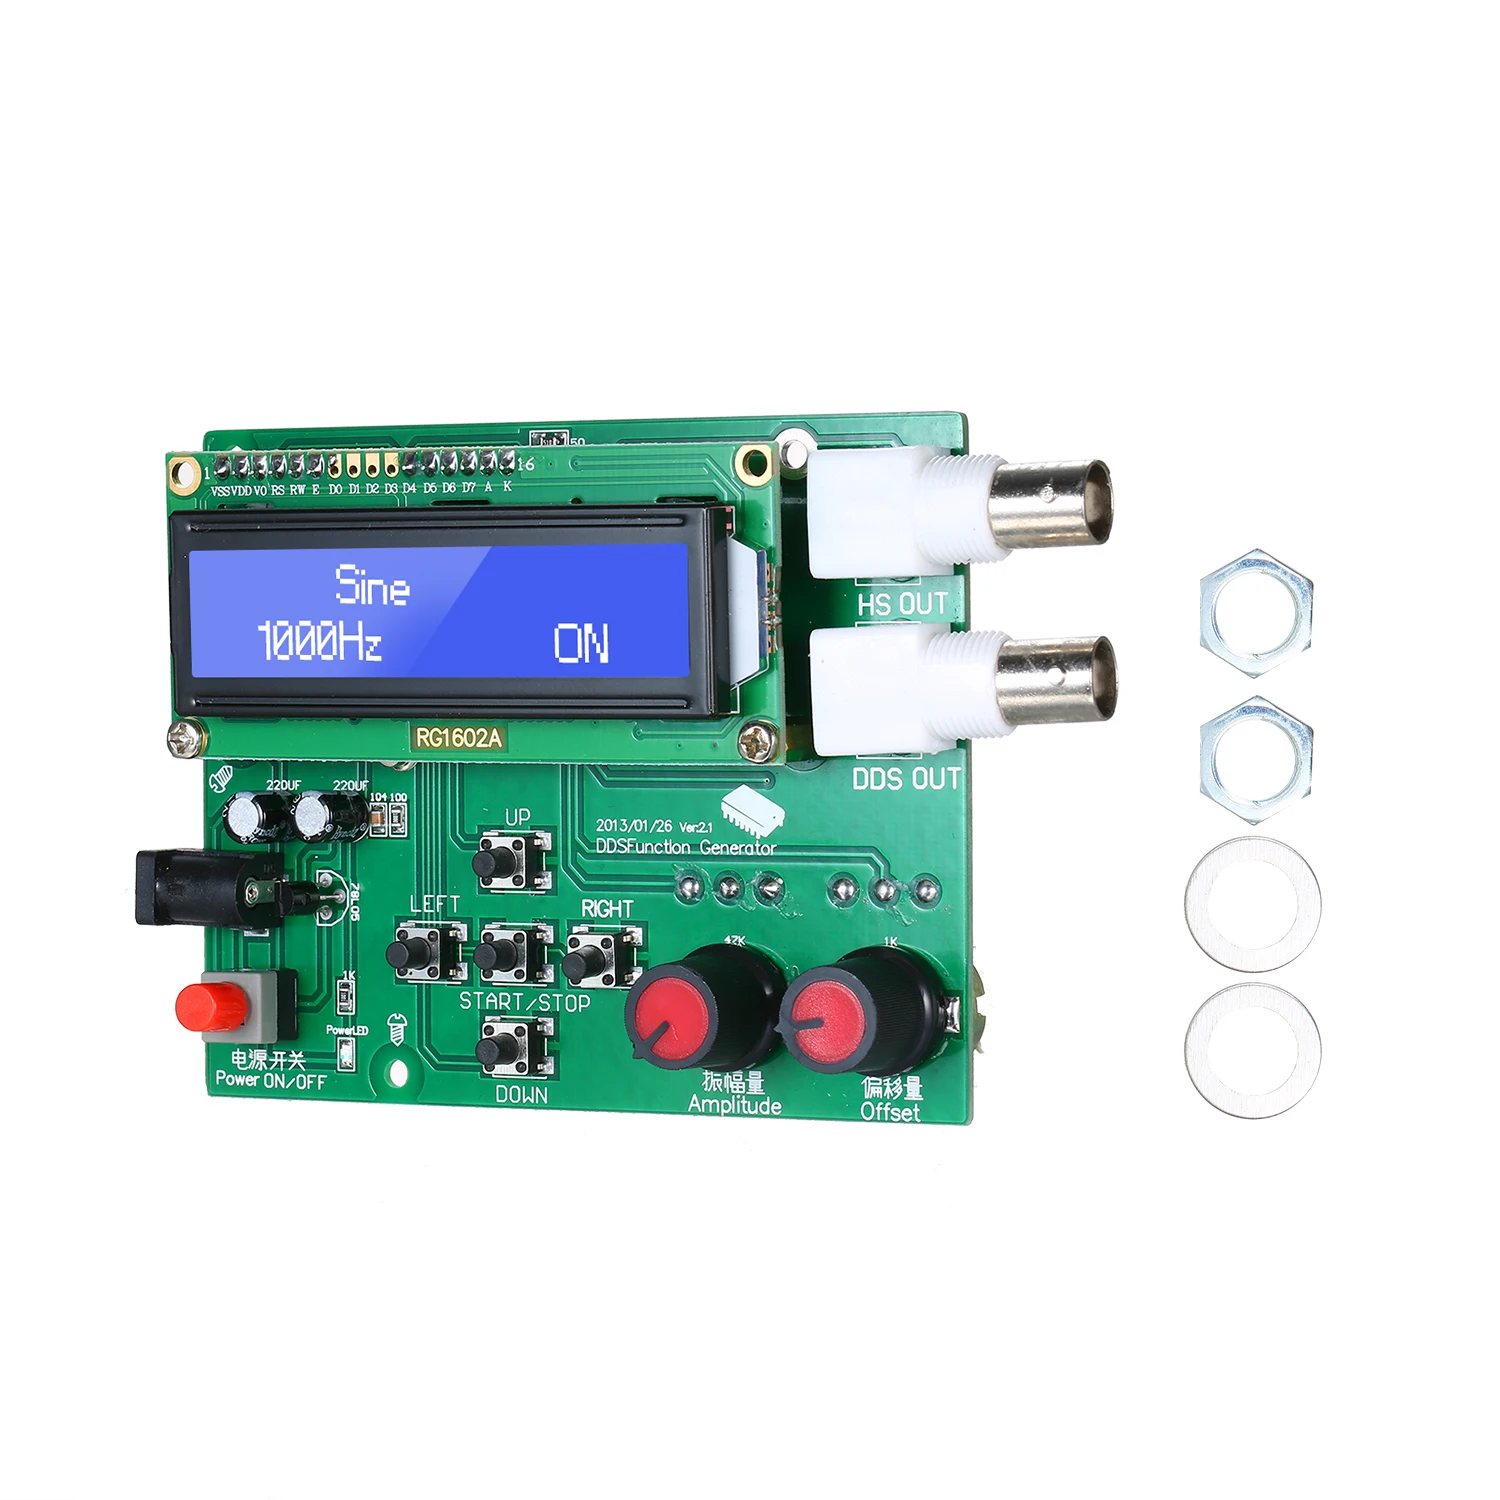 DDS Function Signal Generator Sine Square Triangle Sawtooth Wave Low Frequ LXI 